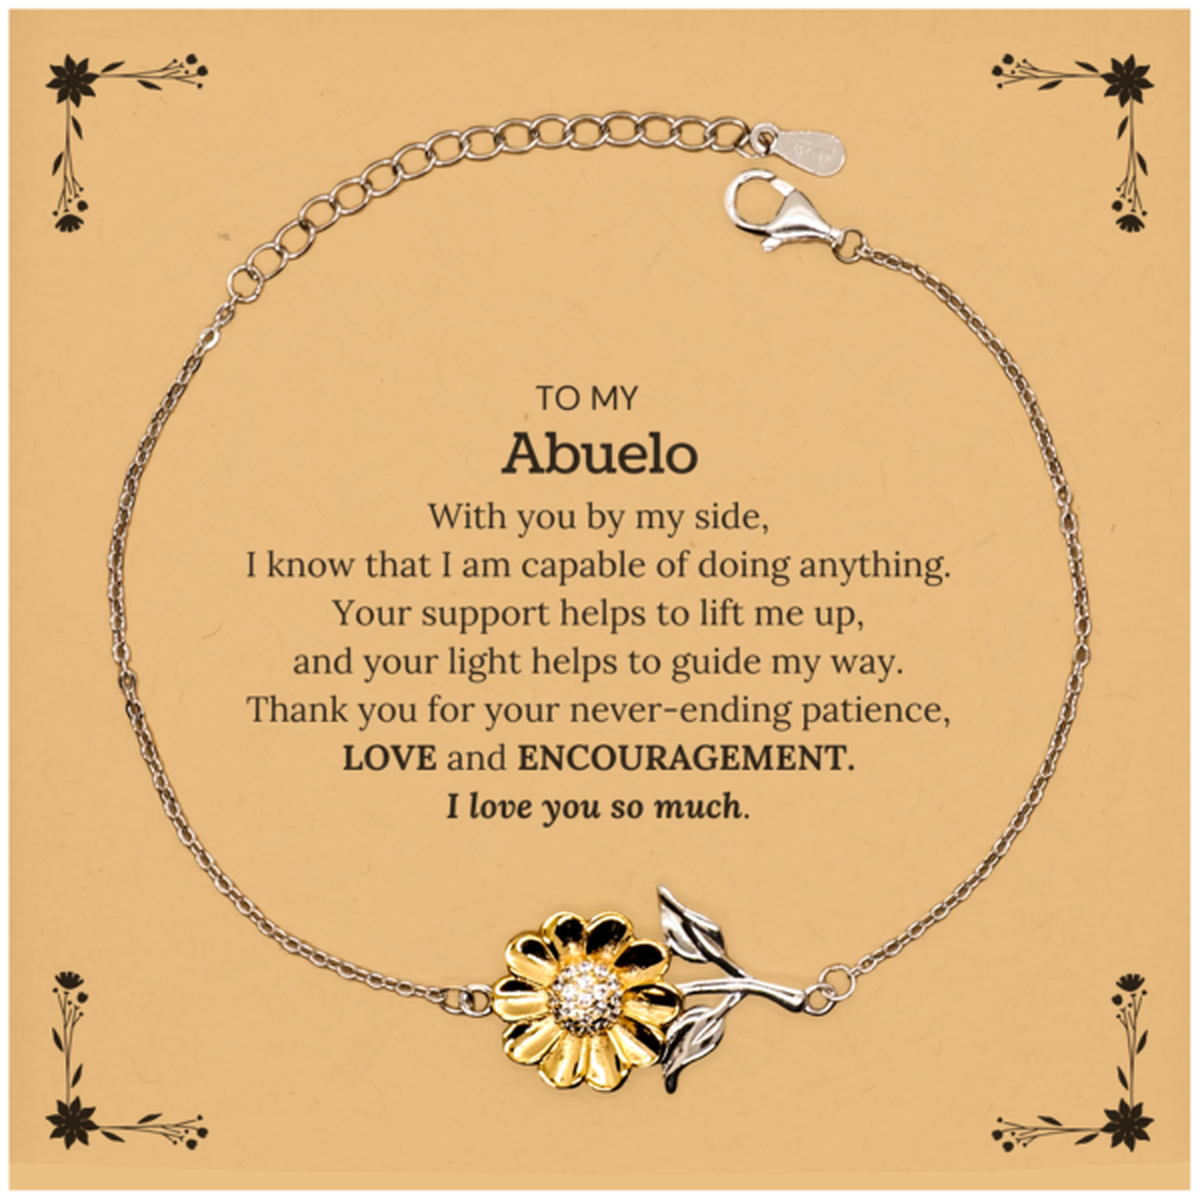 Appreciation Abuelo Sunflower Bracelet Gifts, To My Abuelo Birthday Christmas Wedding Keepsake Gifts for Abuelo With you by my side, I know that I am capable of doing anything. I love you so much